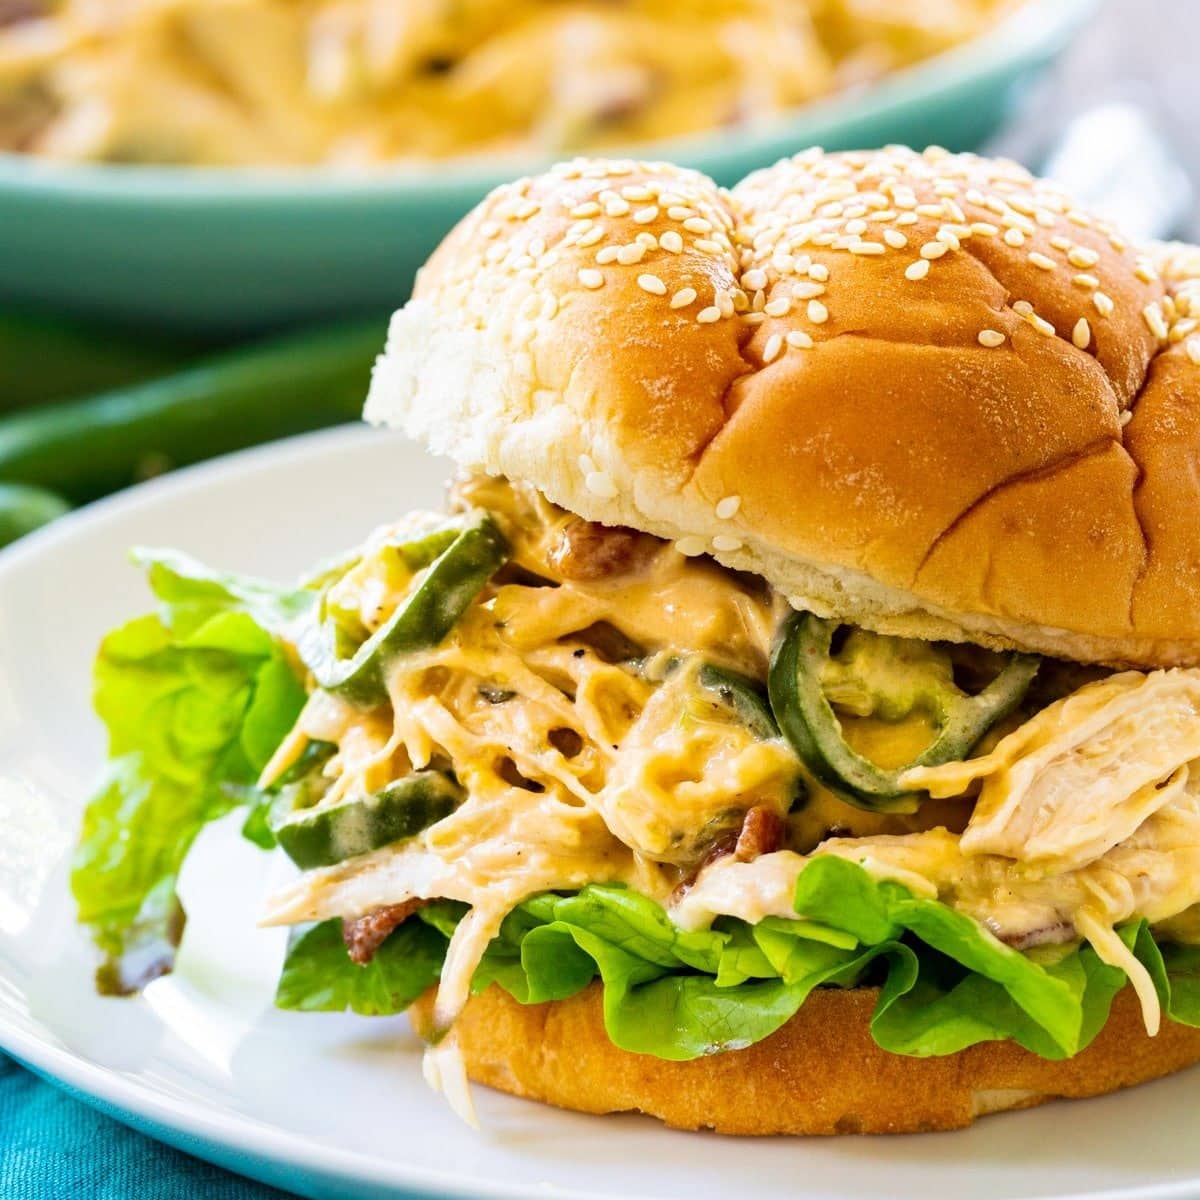 Buns with shredded chicken, jalapenos, lettuce, ranch, and cheese filling.